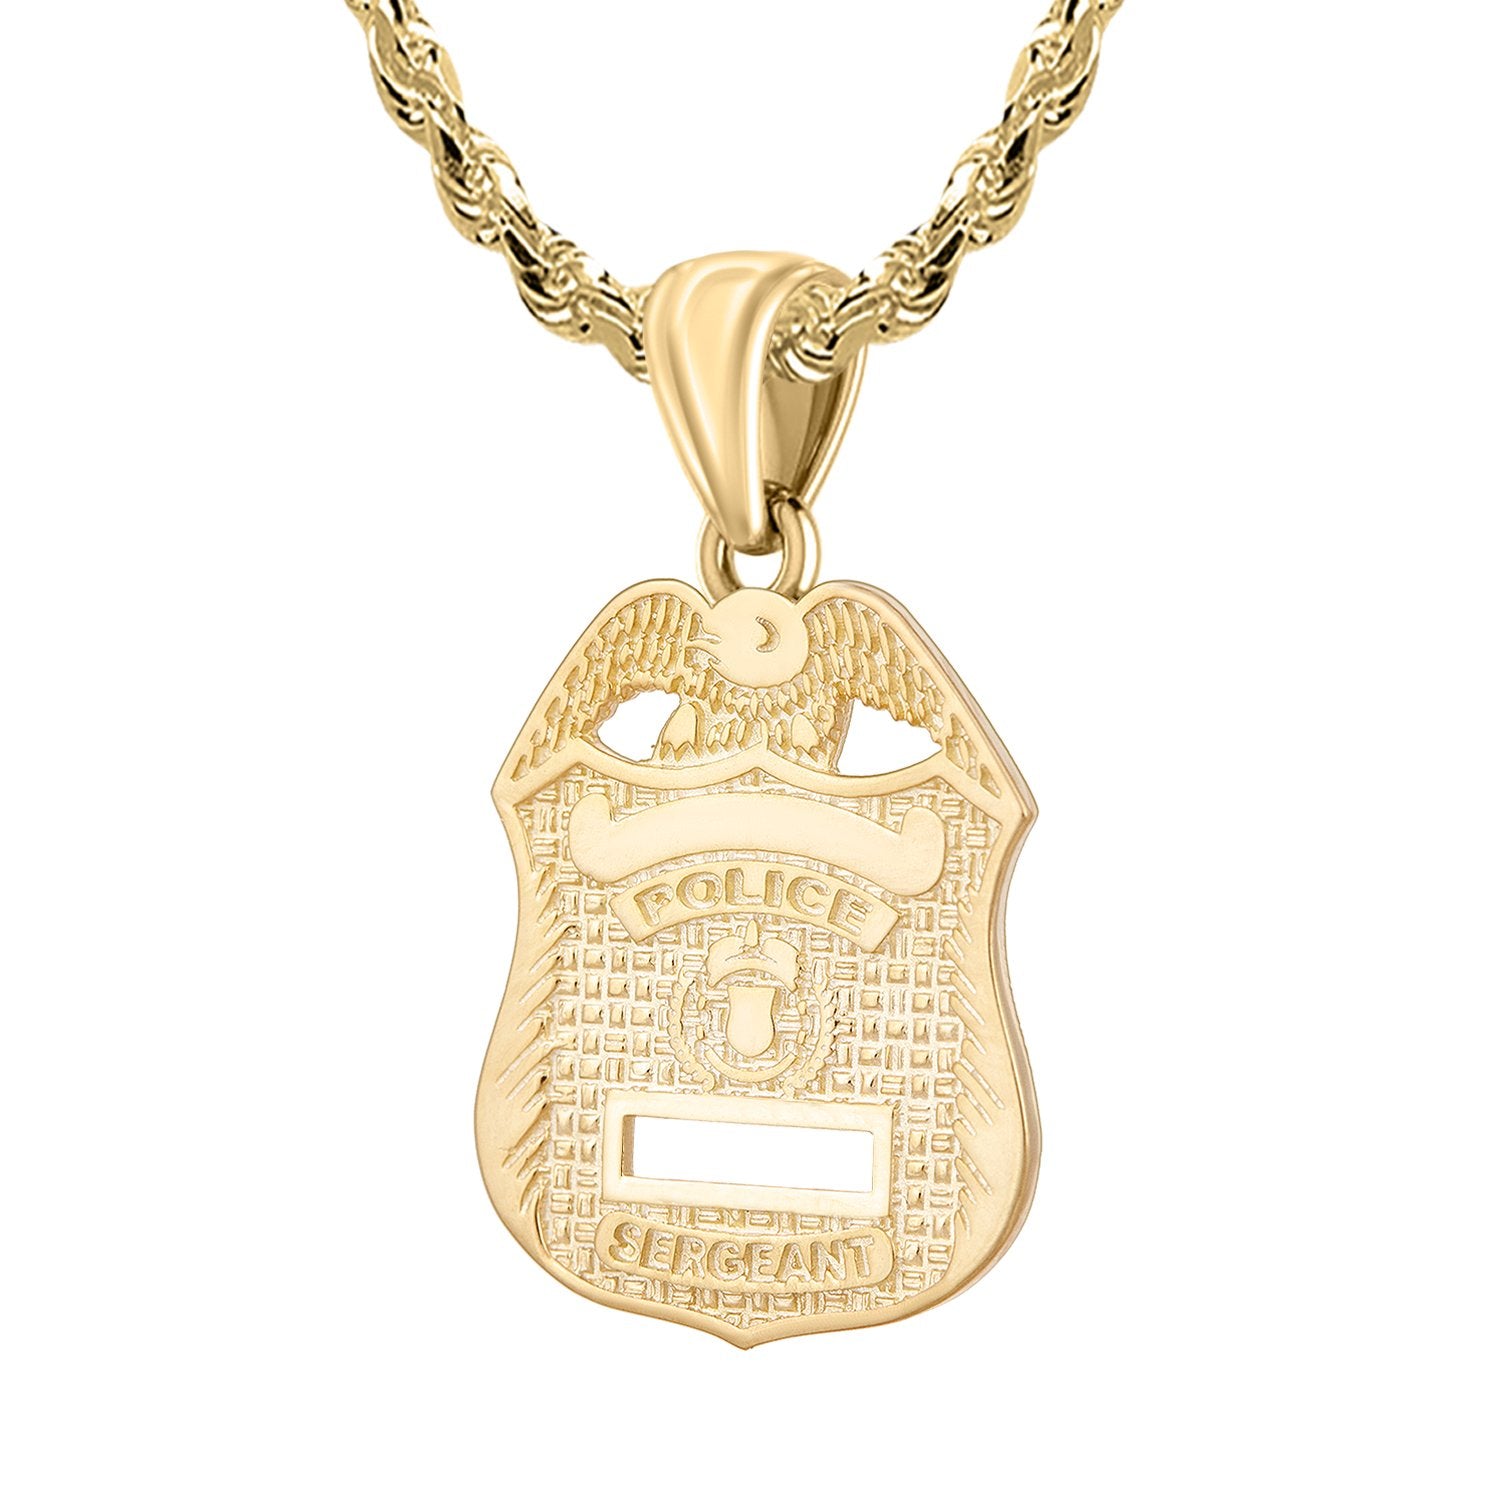 Police Badge Necklace In Gold For Men - 3.5mm Rope Chain